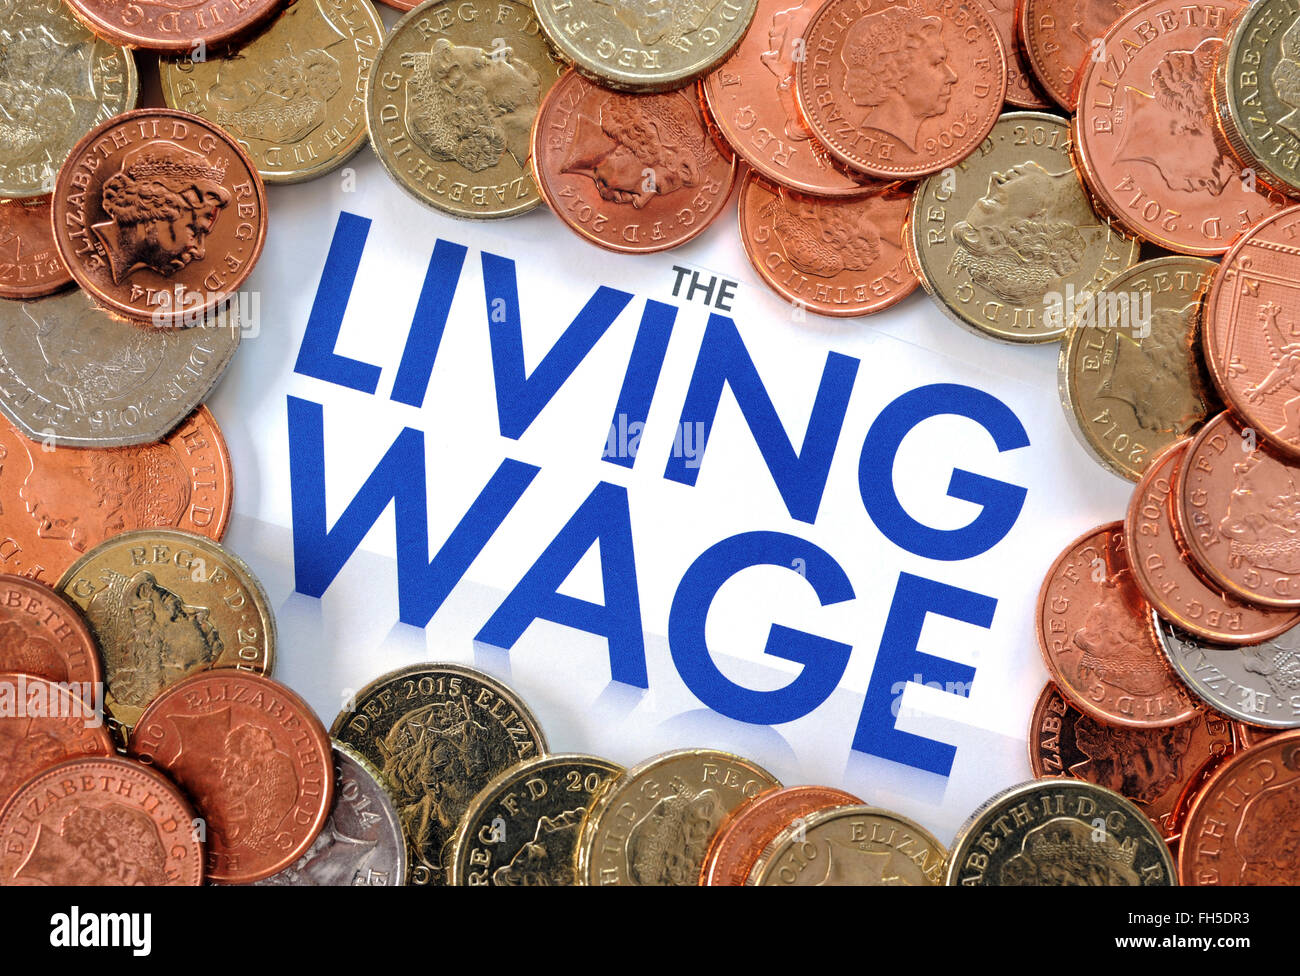 SUPERMARKET RECRUITMENT LEAFLET WITH COINS MONEY RE THE NATIONAL LIVING WAGE WAGES INCOMES WORKERS WELFARE PENSIONS JOB JOBS UK Stock Photo